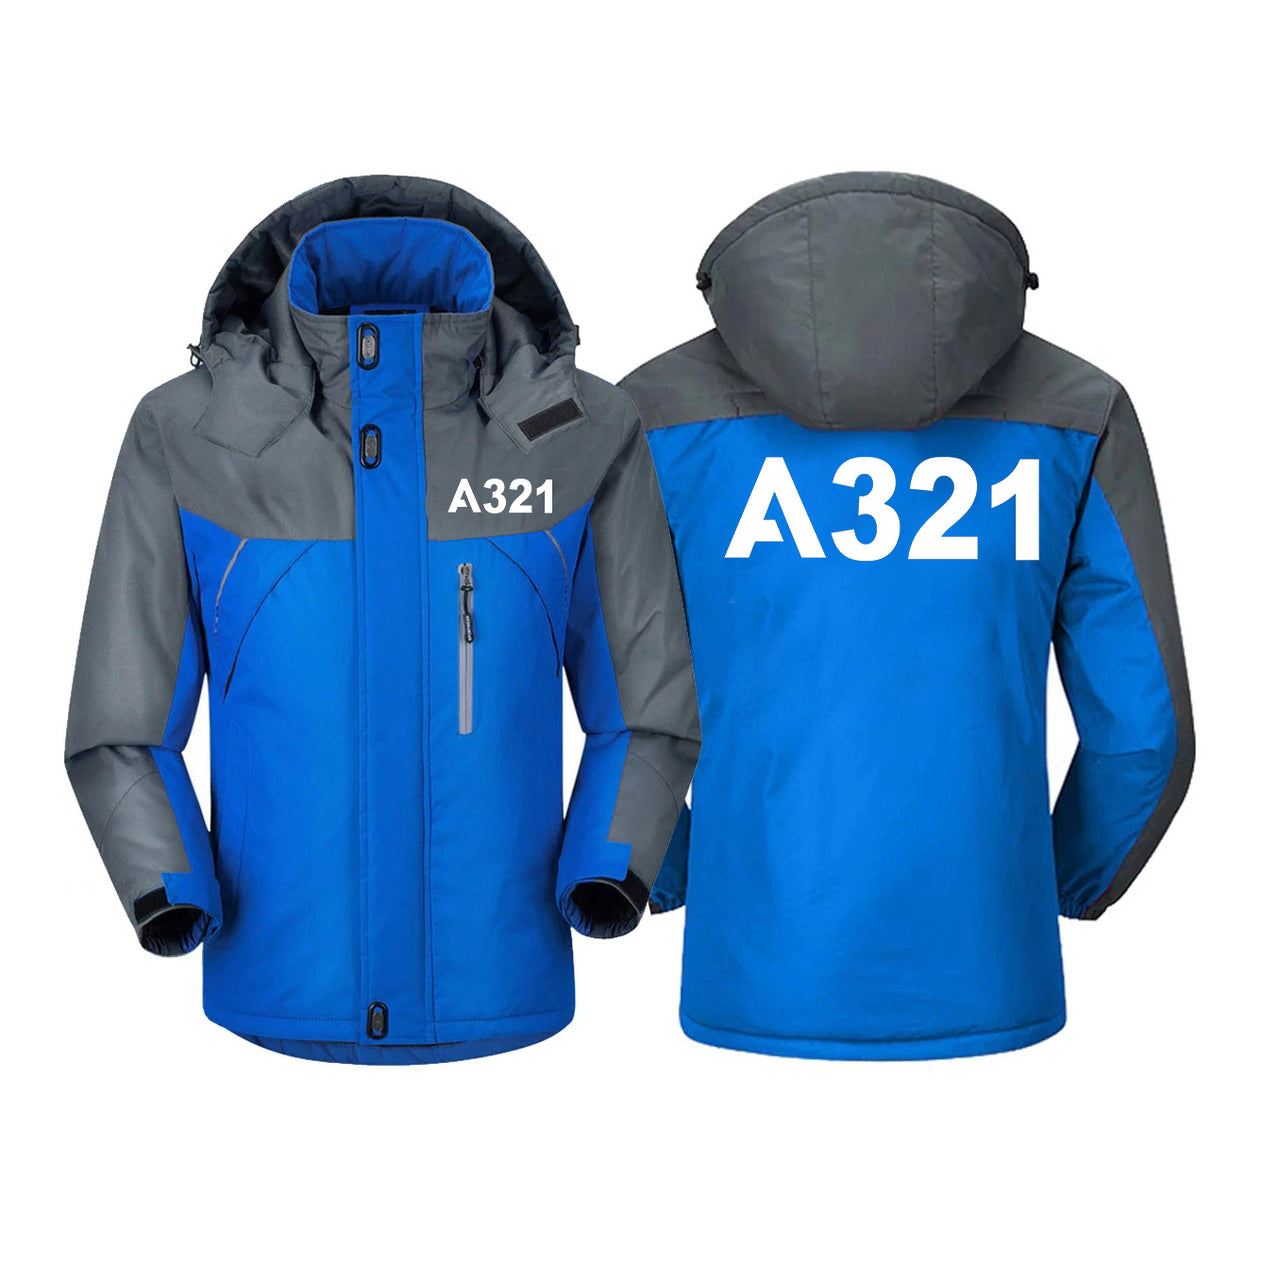 A321 Flat Text Designed Thick Winter Jackets